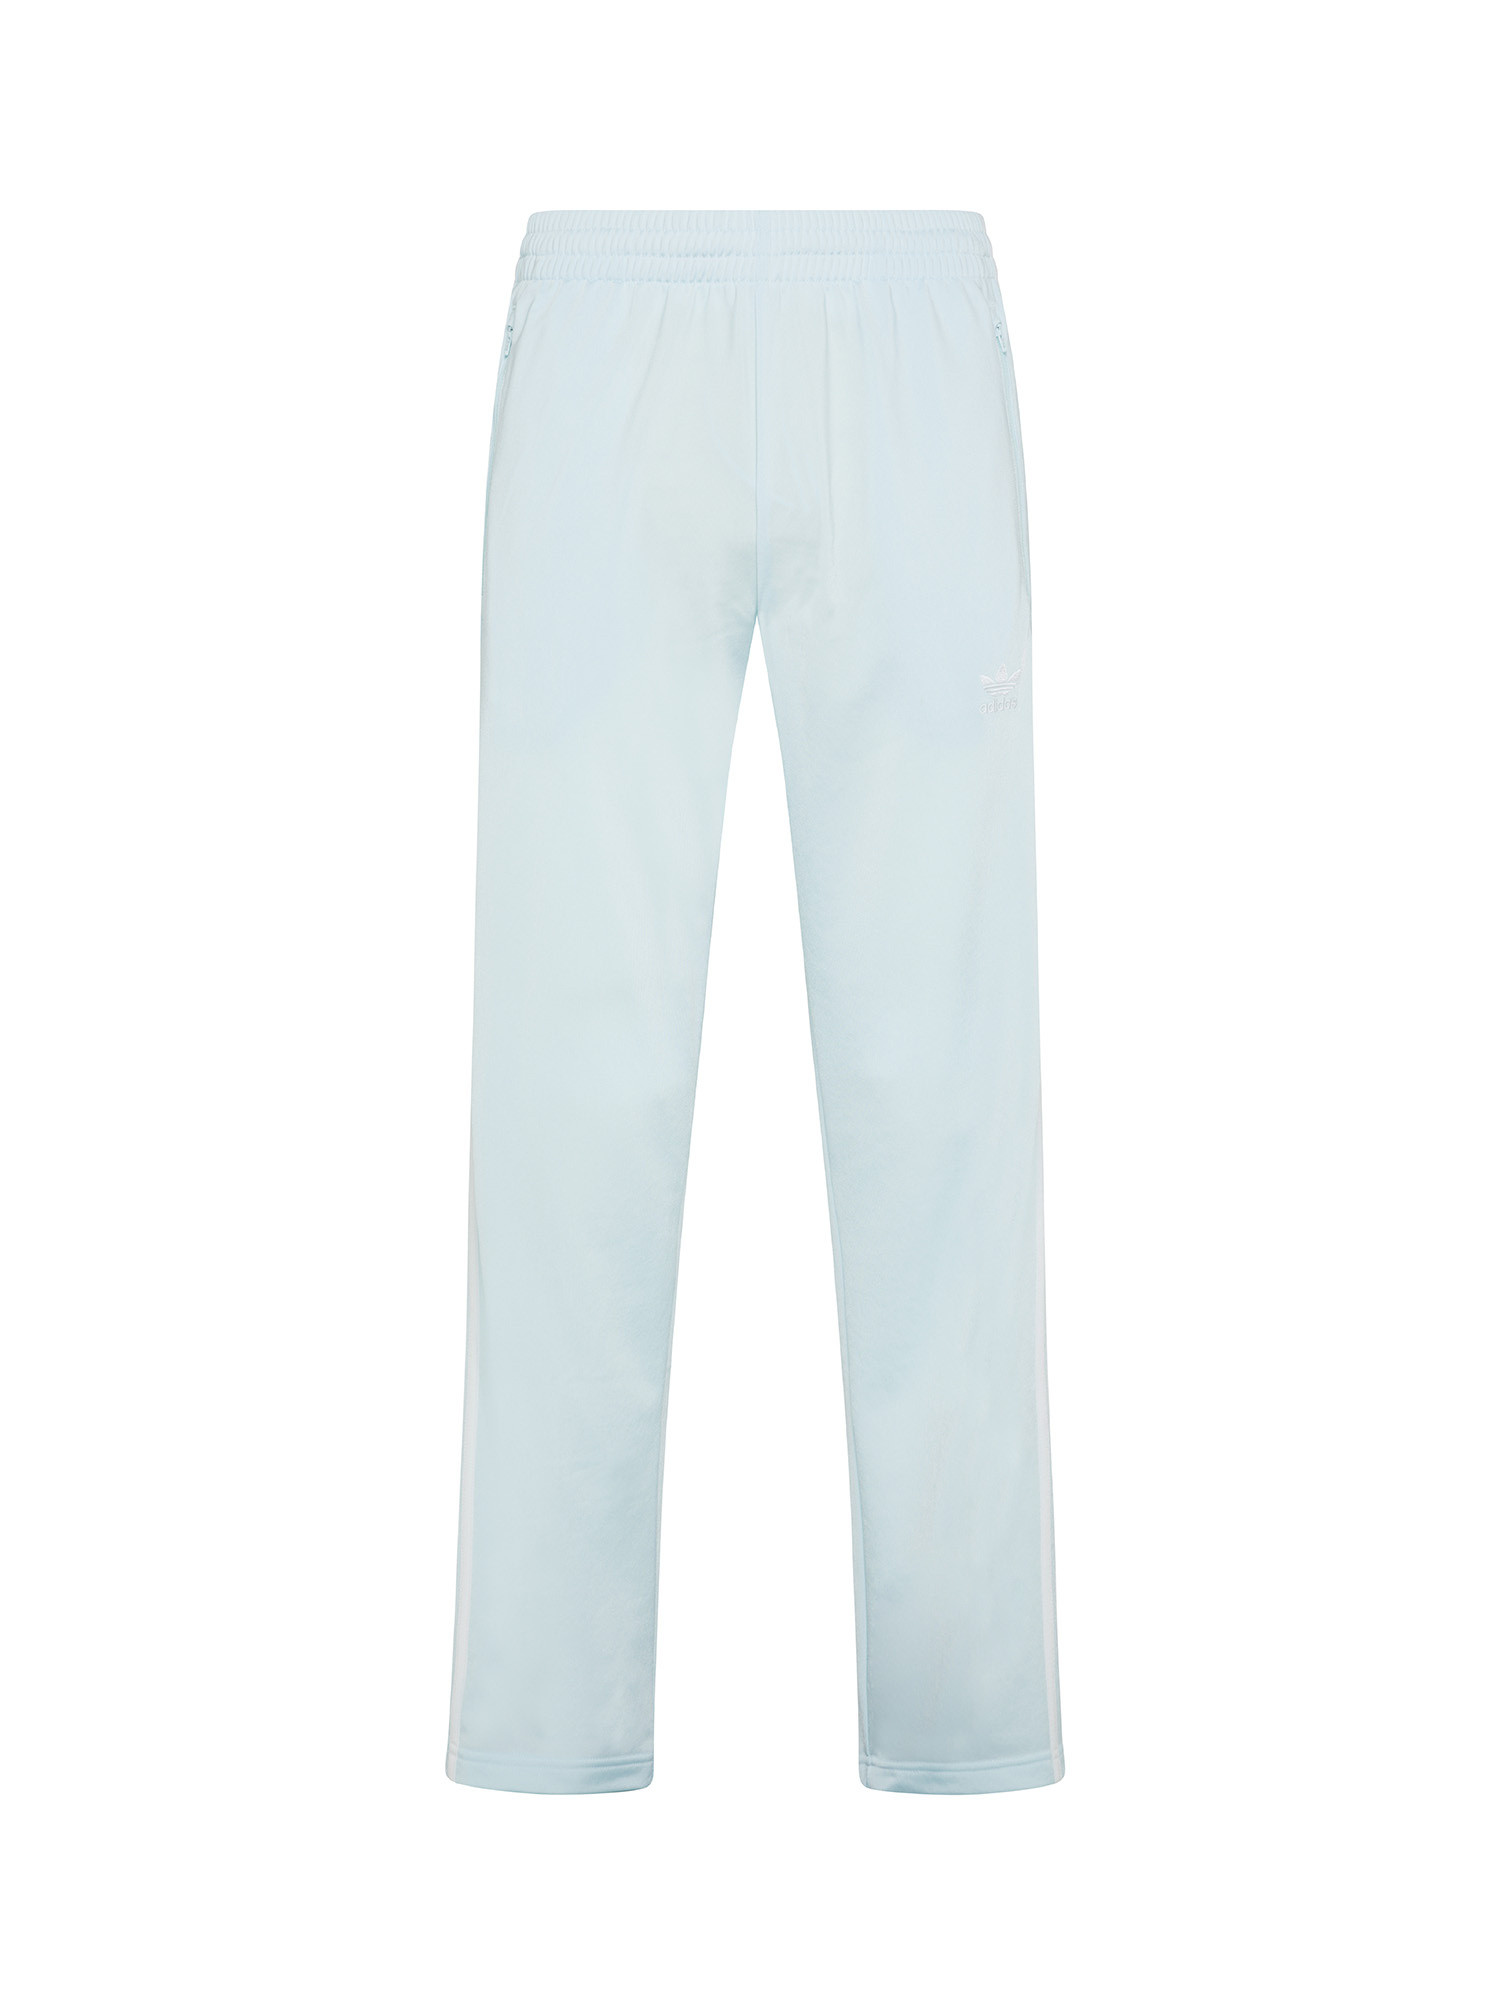 Adidas - Adicolor sports trousers, Light Blue, large image number 0